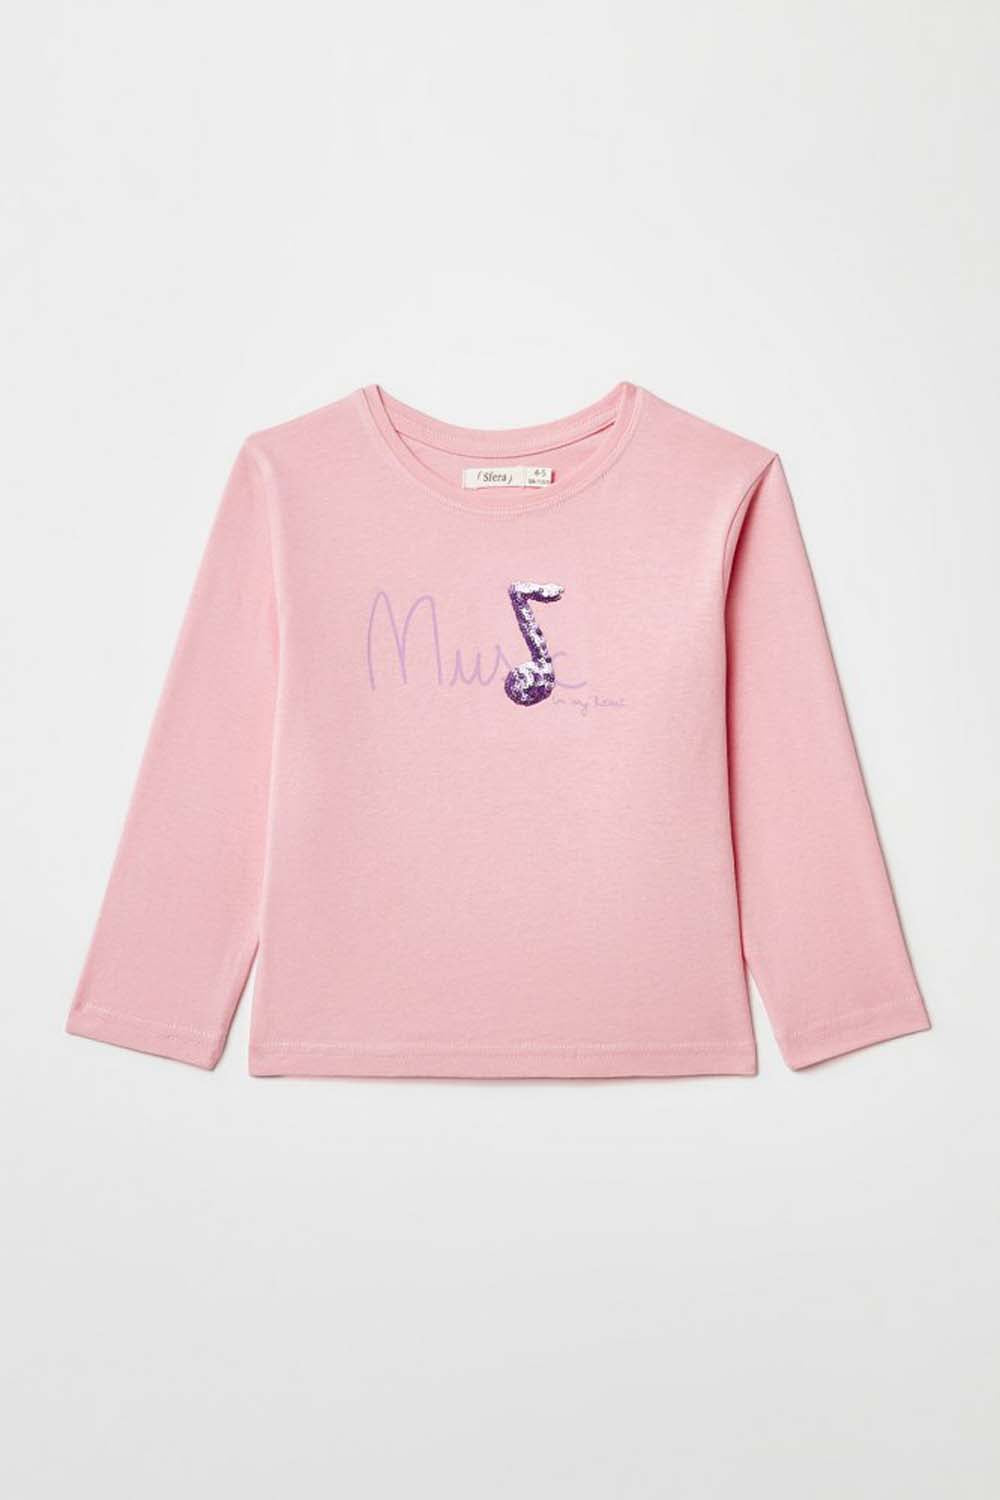 Girls Sequined Music Top - Pink